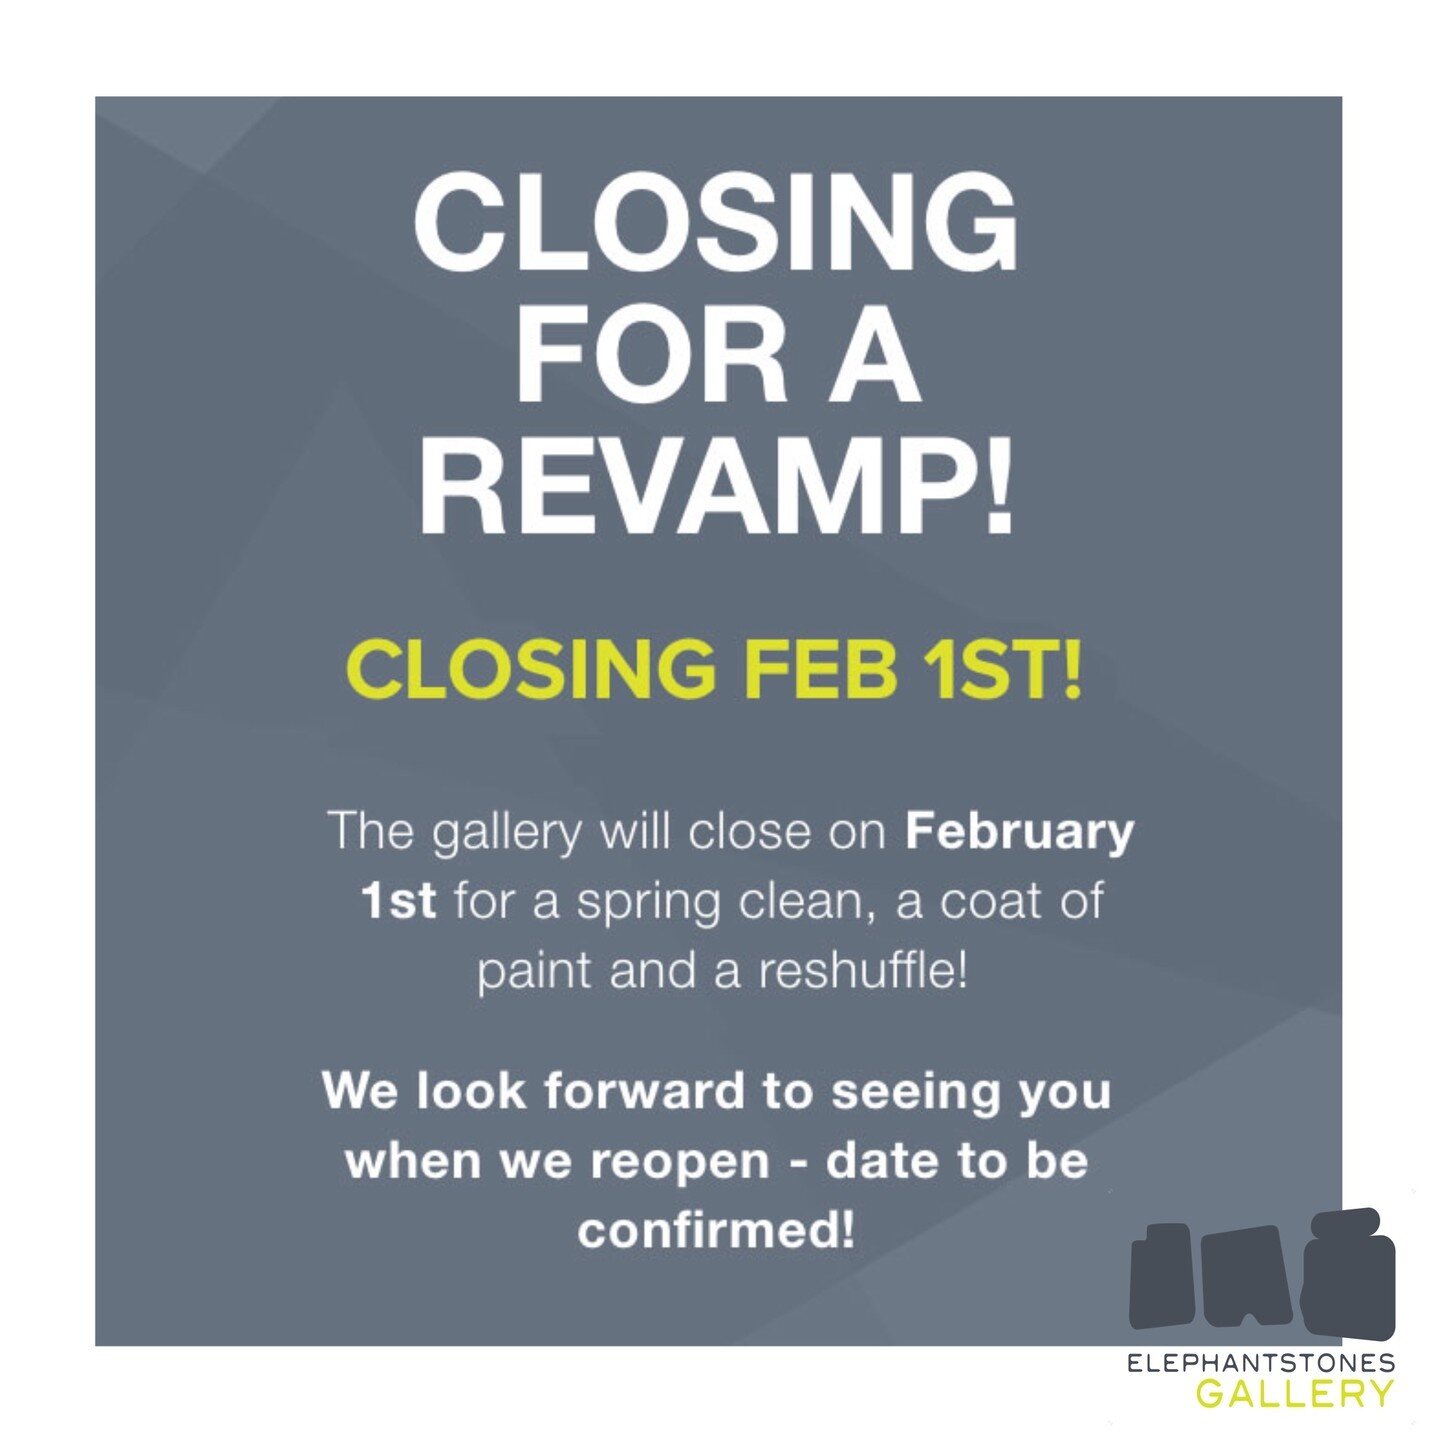 CLOSING FOR A REVAMP - CLOSING FEBRUARY 1ST! 🚨
-
After a fantastic response to our January sale, the gallery is ready to close for a spring clean, a coat of paint and a reshuffle! We really appreciate your support and look forward to seeing you when